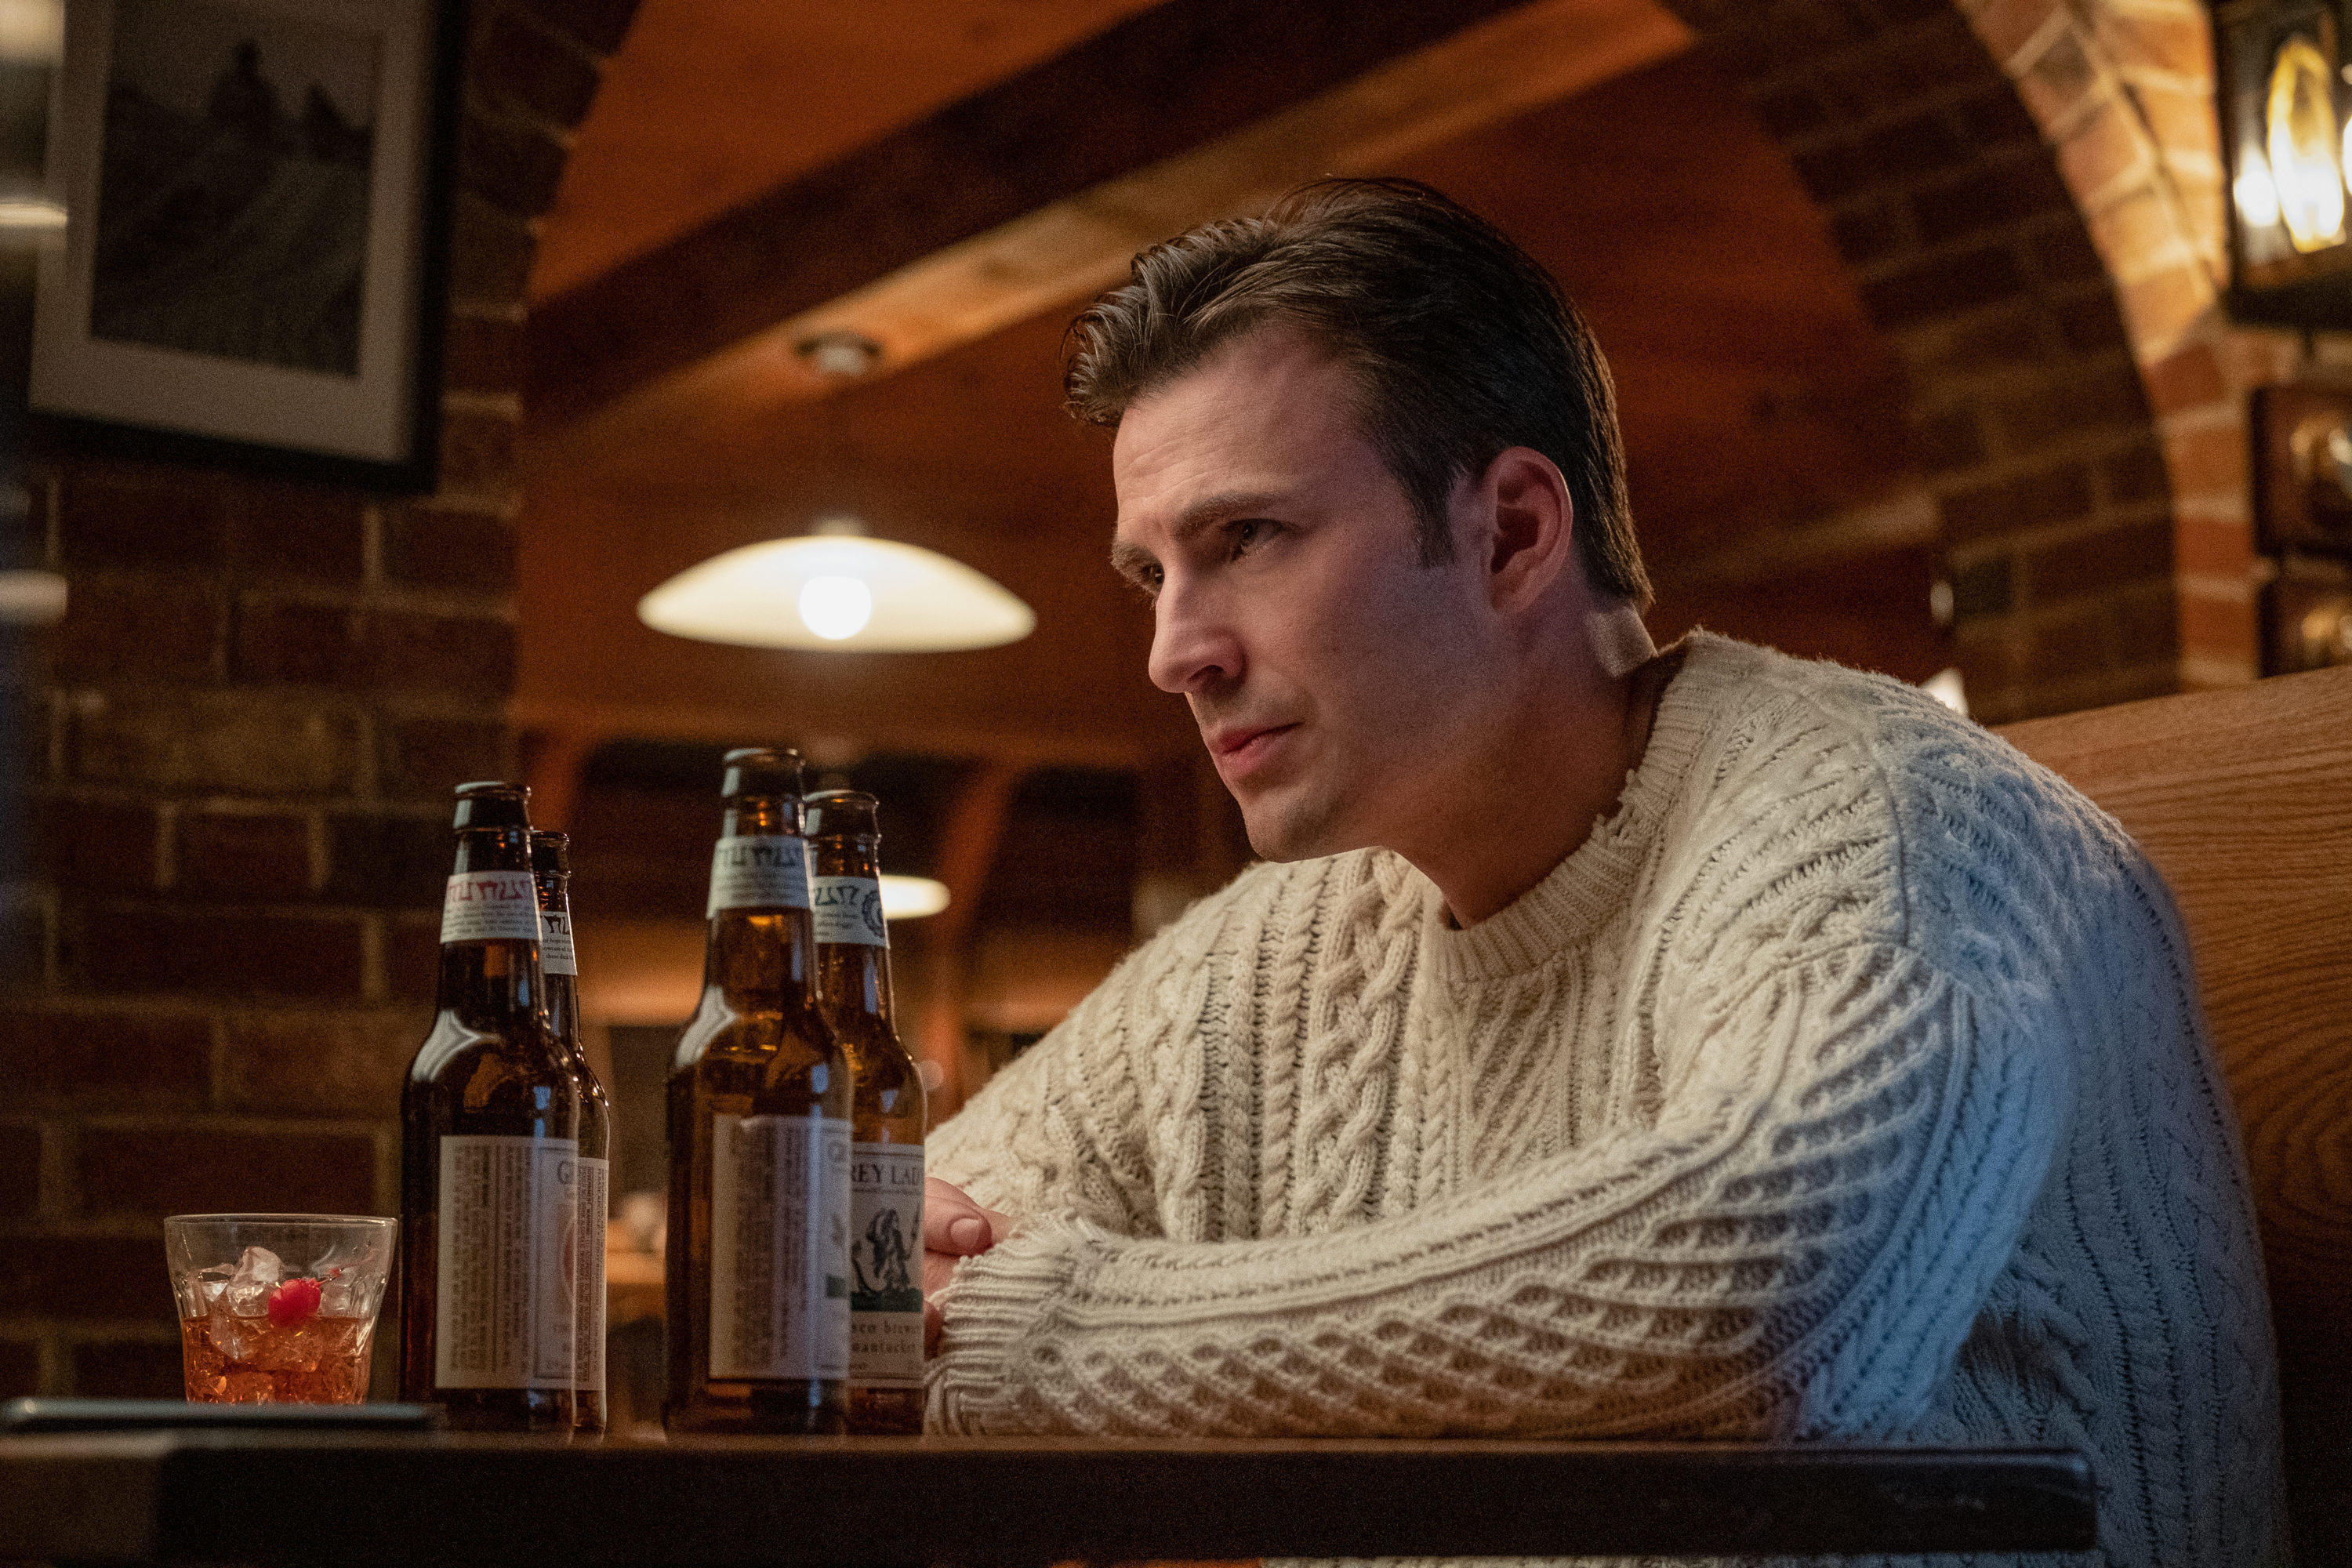 Chris Evans in a white sweater stares intensely near four beer bottles on a table